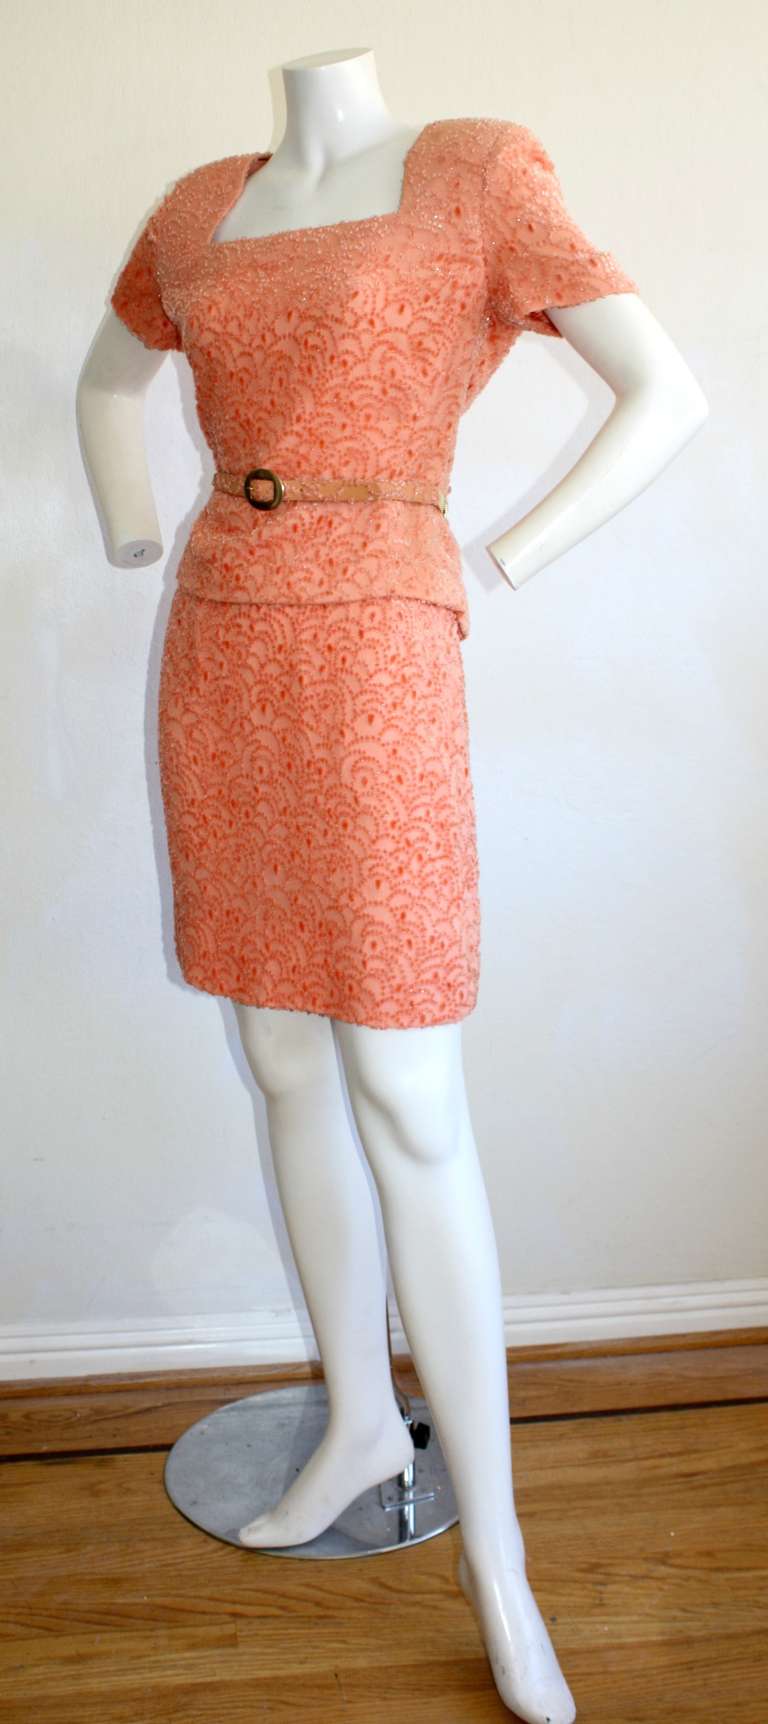 Gorgeous Brand NEW Vintage Galanos salmon colored skirt suit, with matching belt. Brand new with tags from Neiman Marcus. Retailed for $4,370 in the 1990s. All three pieces work great as separates. Marked Size 10. More like Size 6/8. Please see